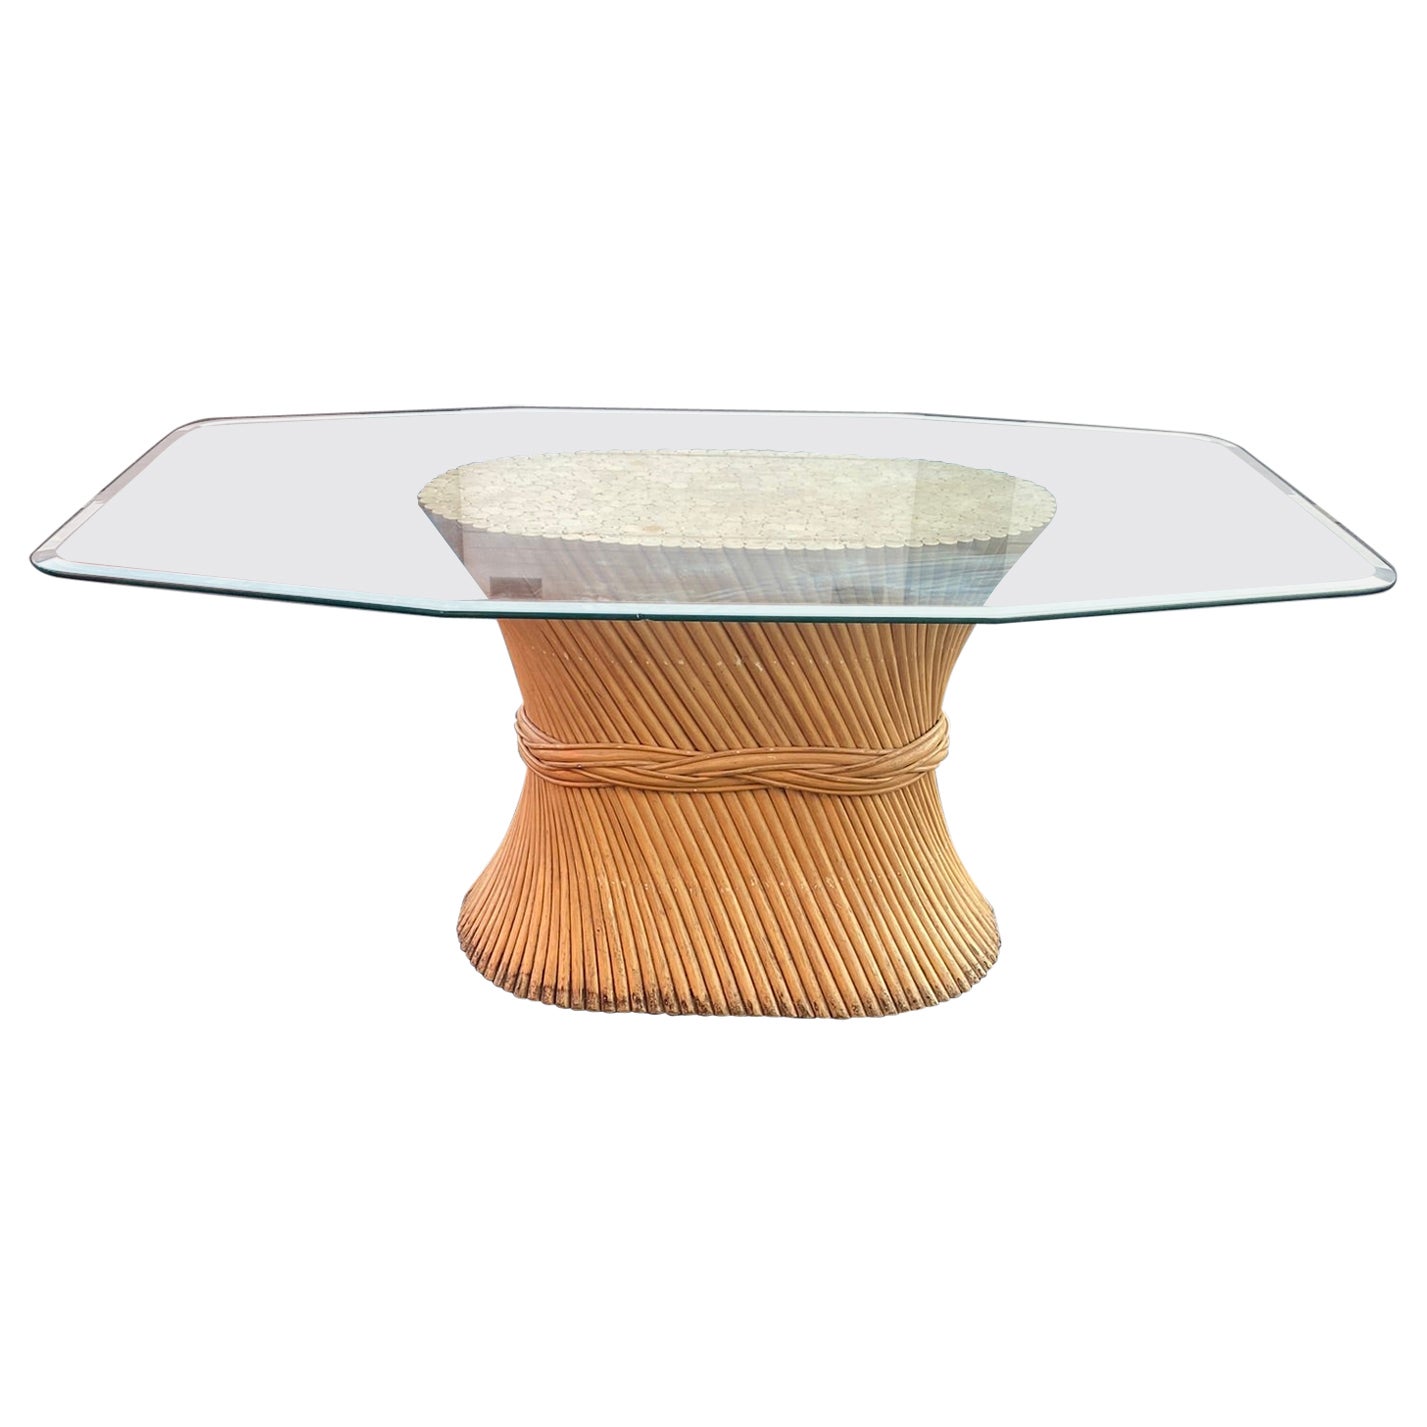 Elinor and John Mc GUIRE , Bamboo and Glass Dining Table circa 1970 For Sale